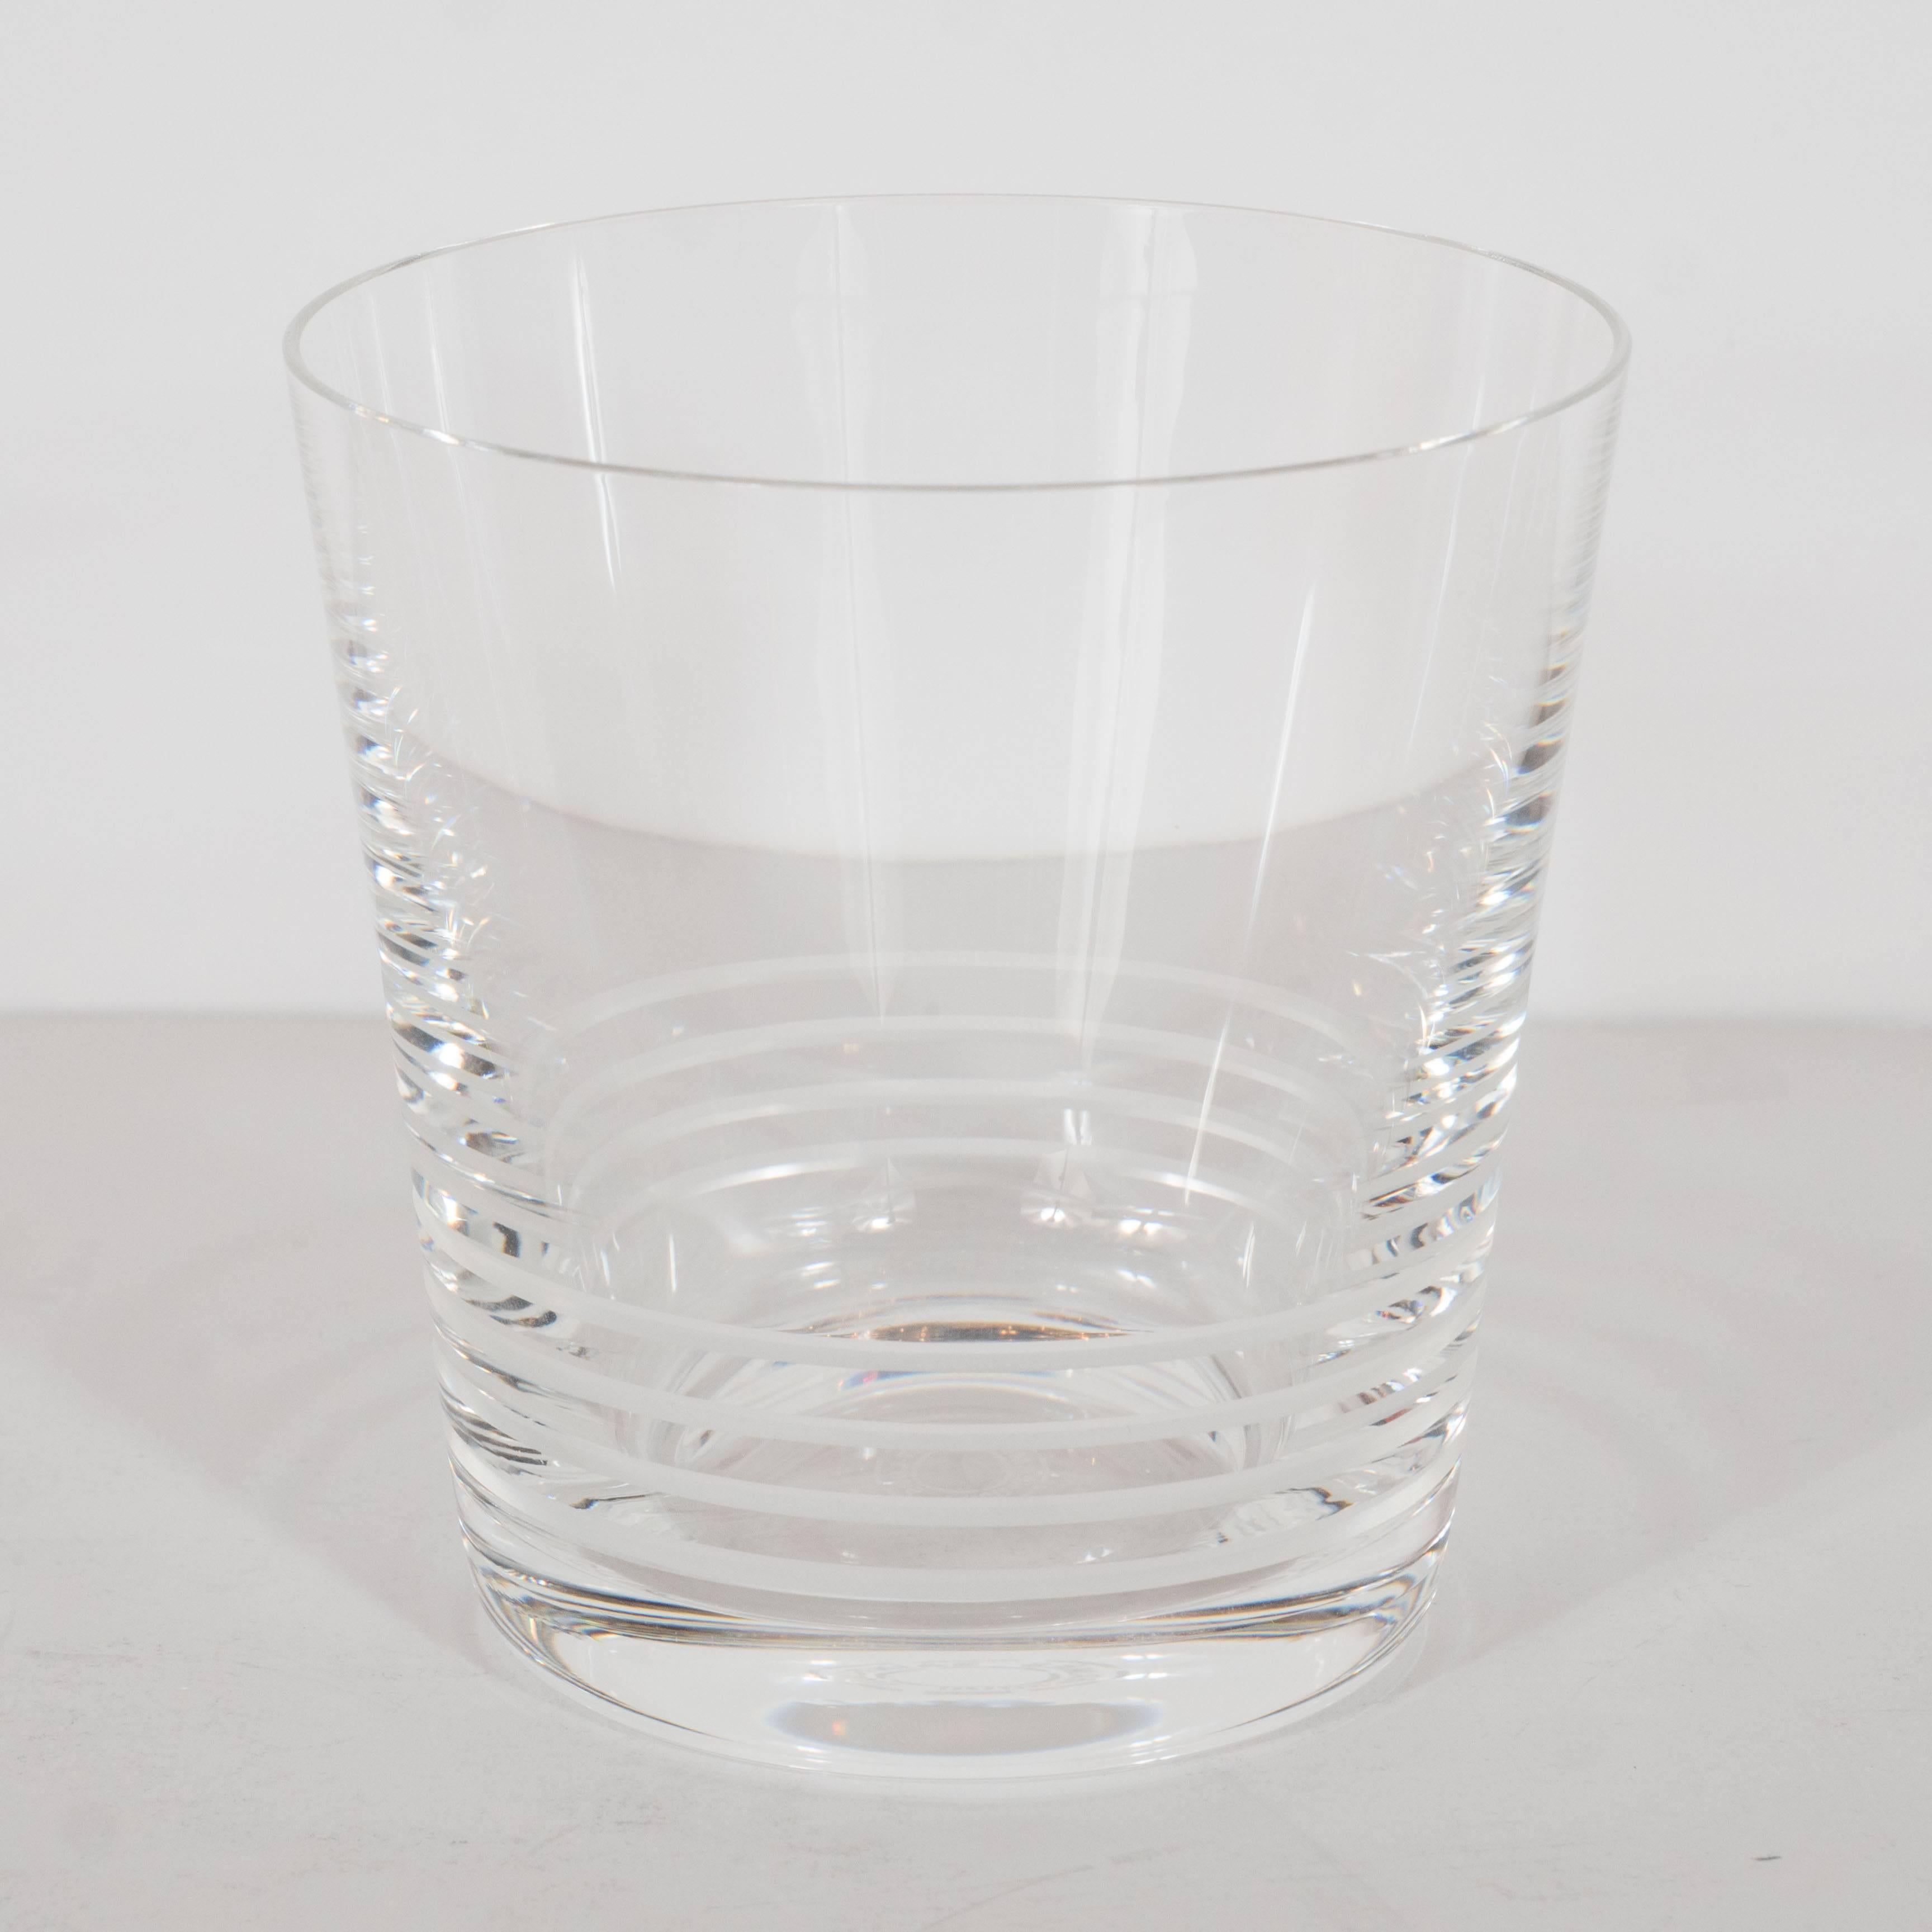 An exquisite set of 12 Attelage series crystal tumblers by Saint Louis for Hermes. Weighted bases support a slightly tapered form. Circular etchings along the bottom outer perimeter of the glass adorns each. Stamped 